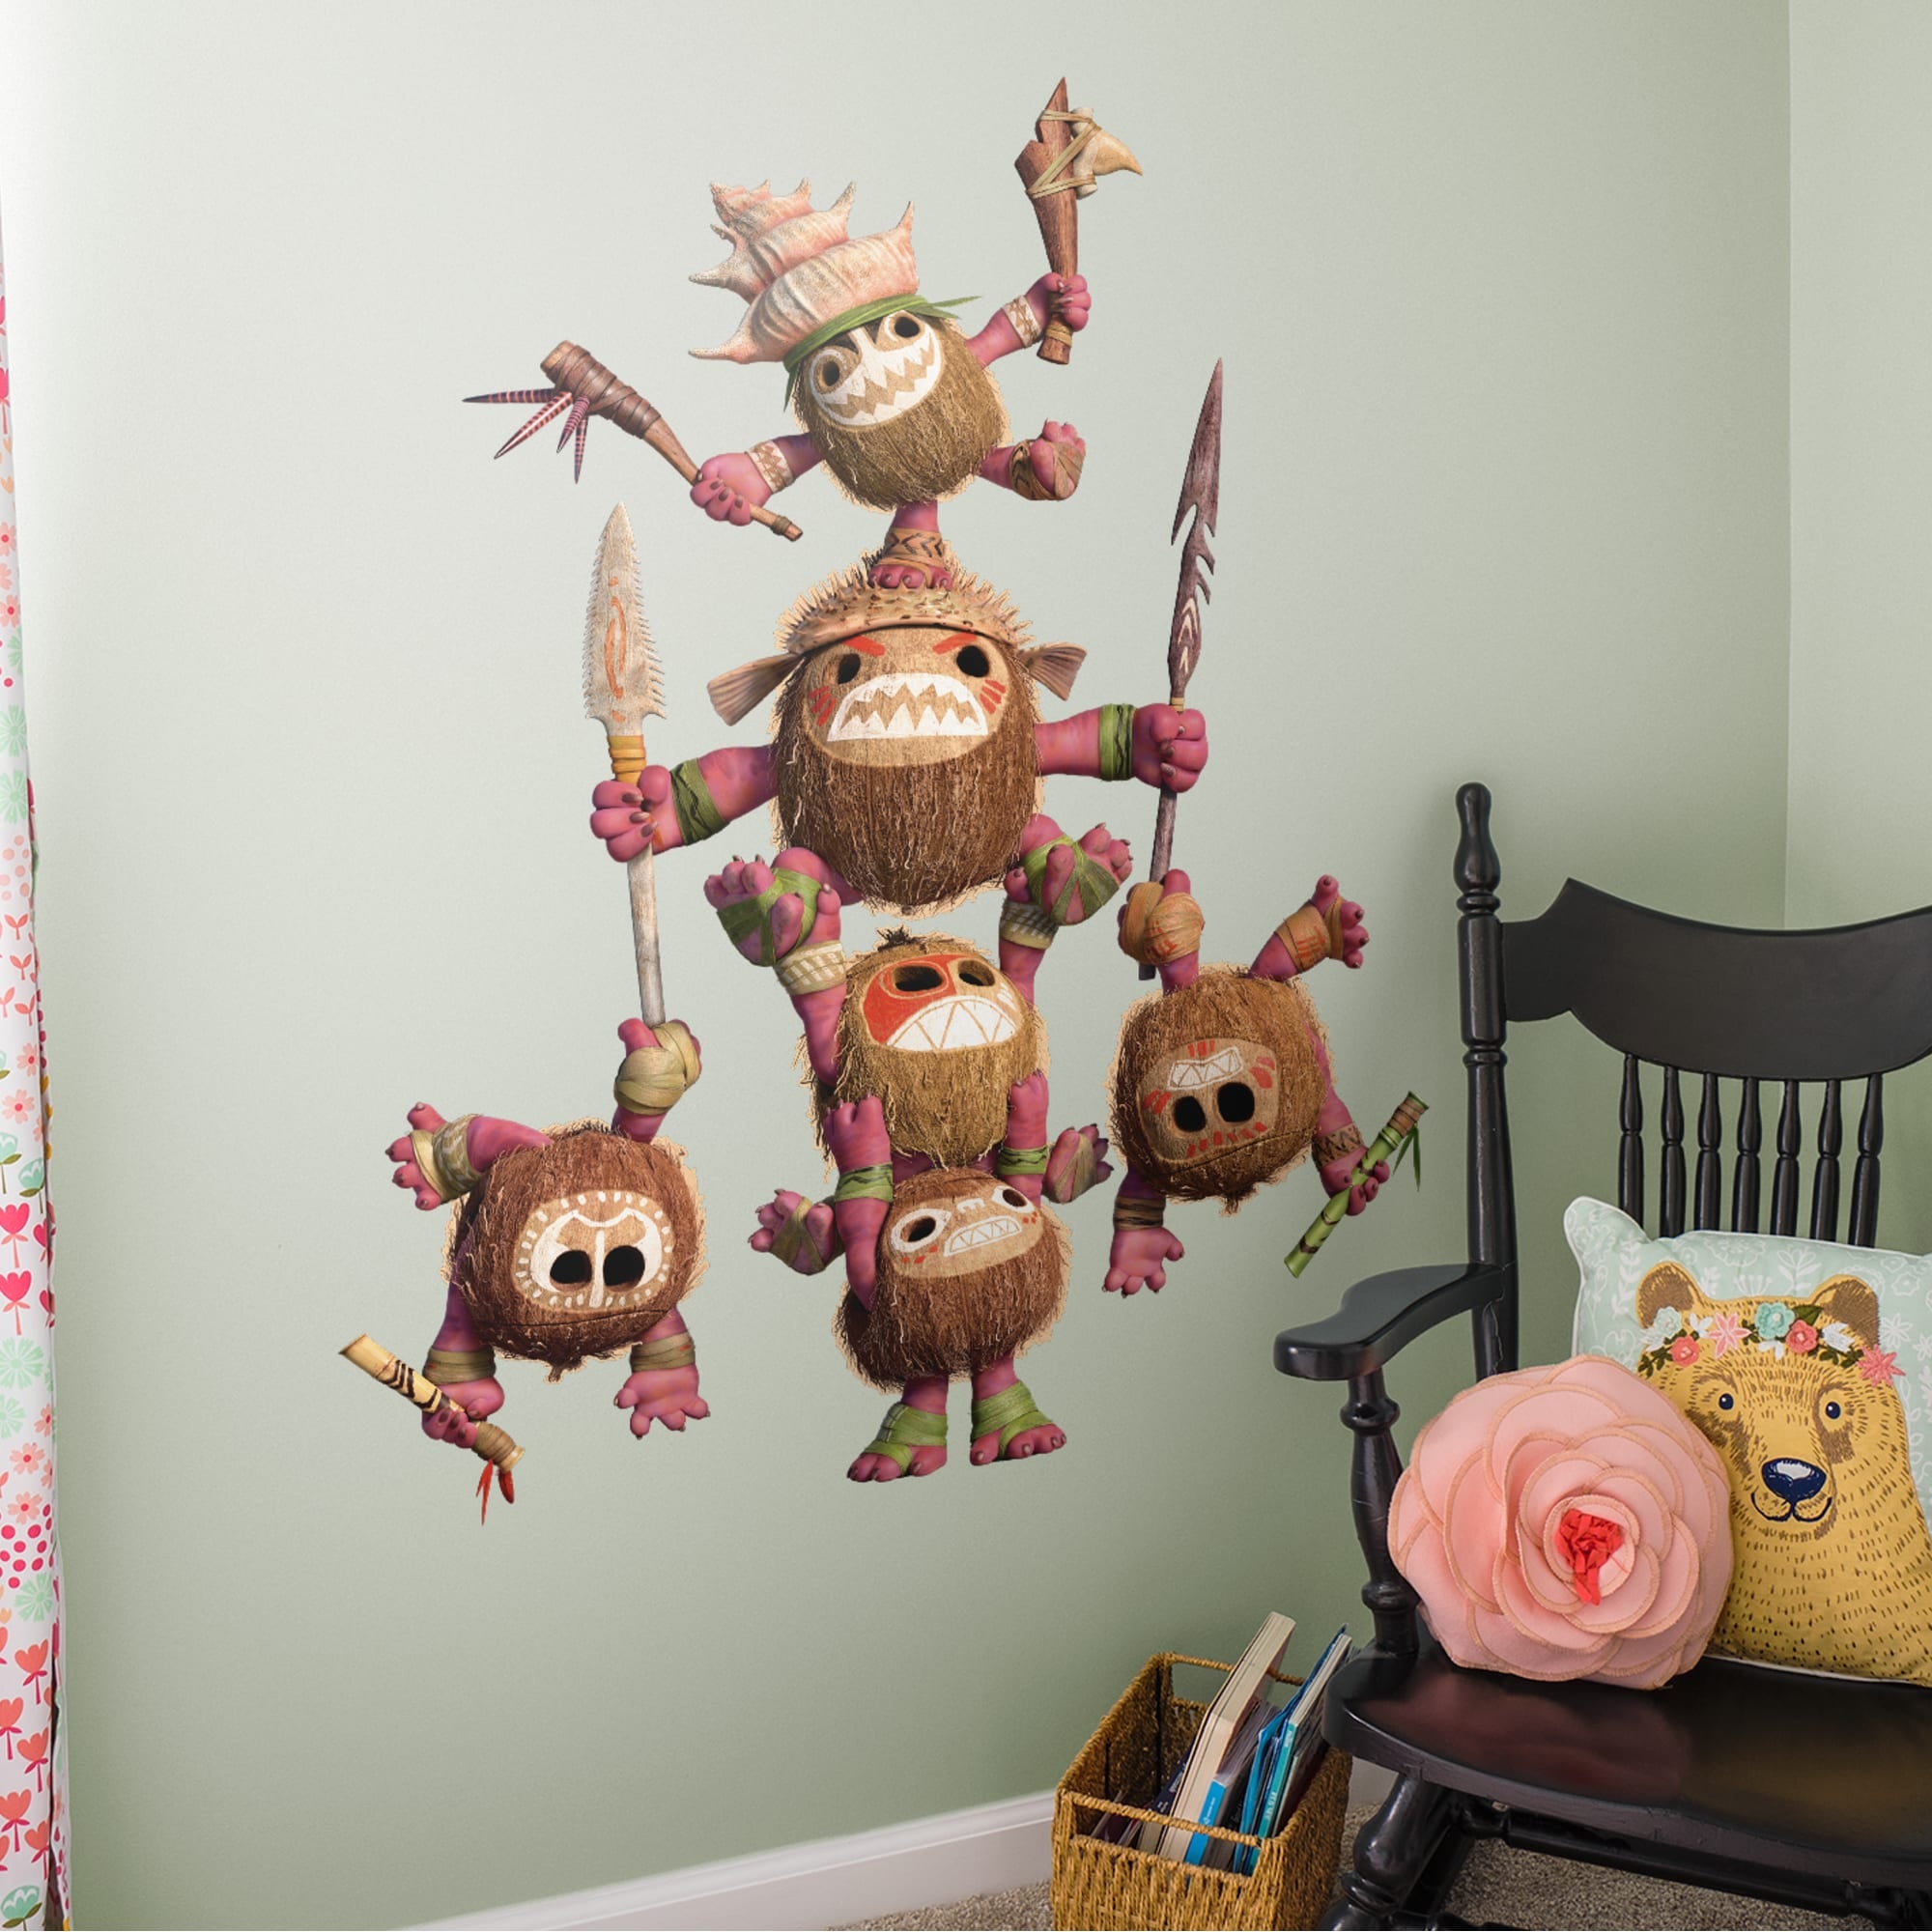 Moana: Kakamora Warriors - Officially Licensed Disney Removable Wall Decal 37.0"W x 51.0"H by Fathead | Vinyl